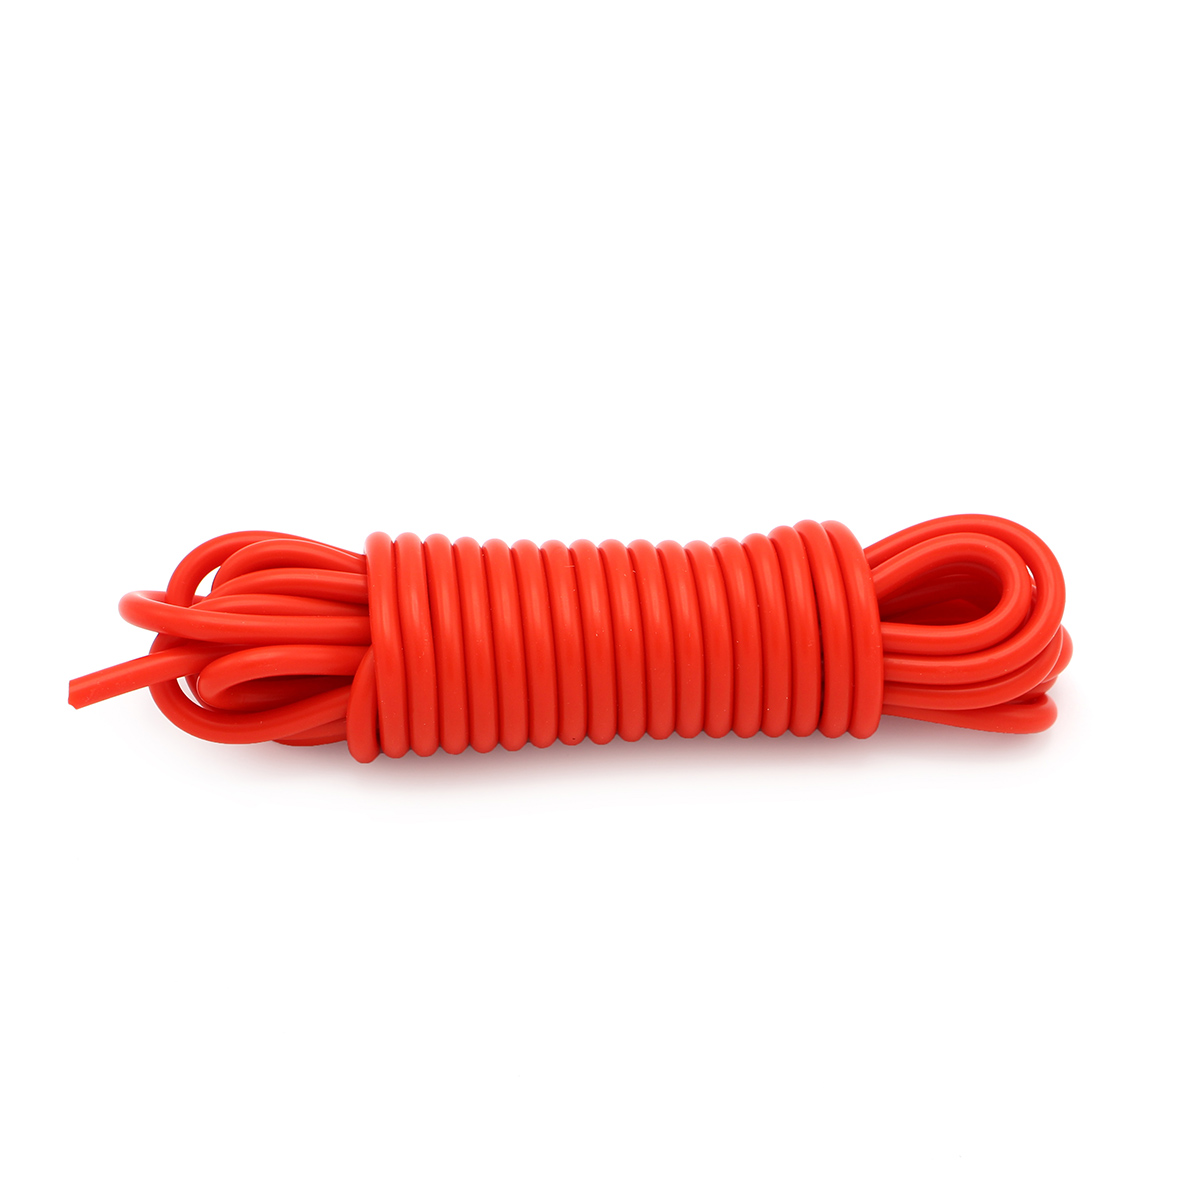 Silicone-Rope-Red-5-meter-OPR-2050057-1